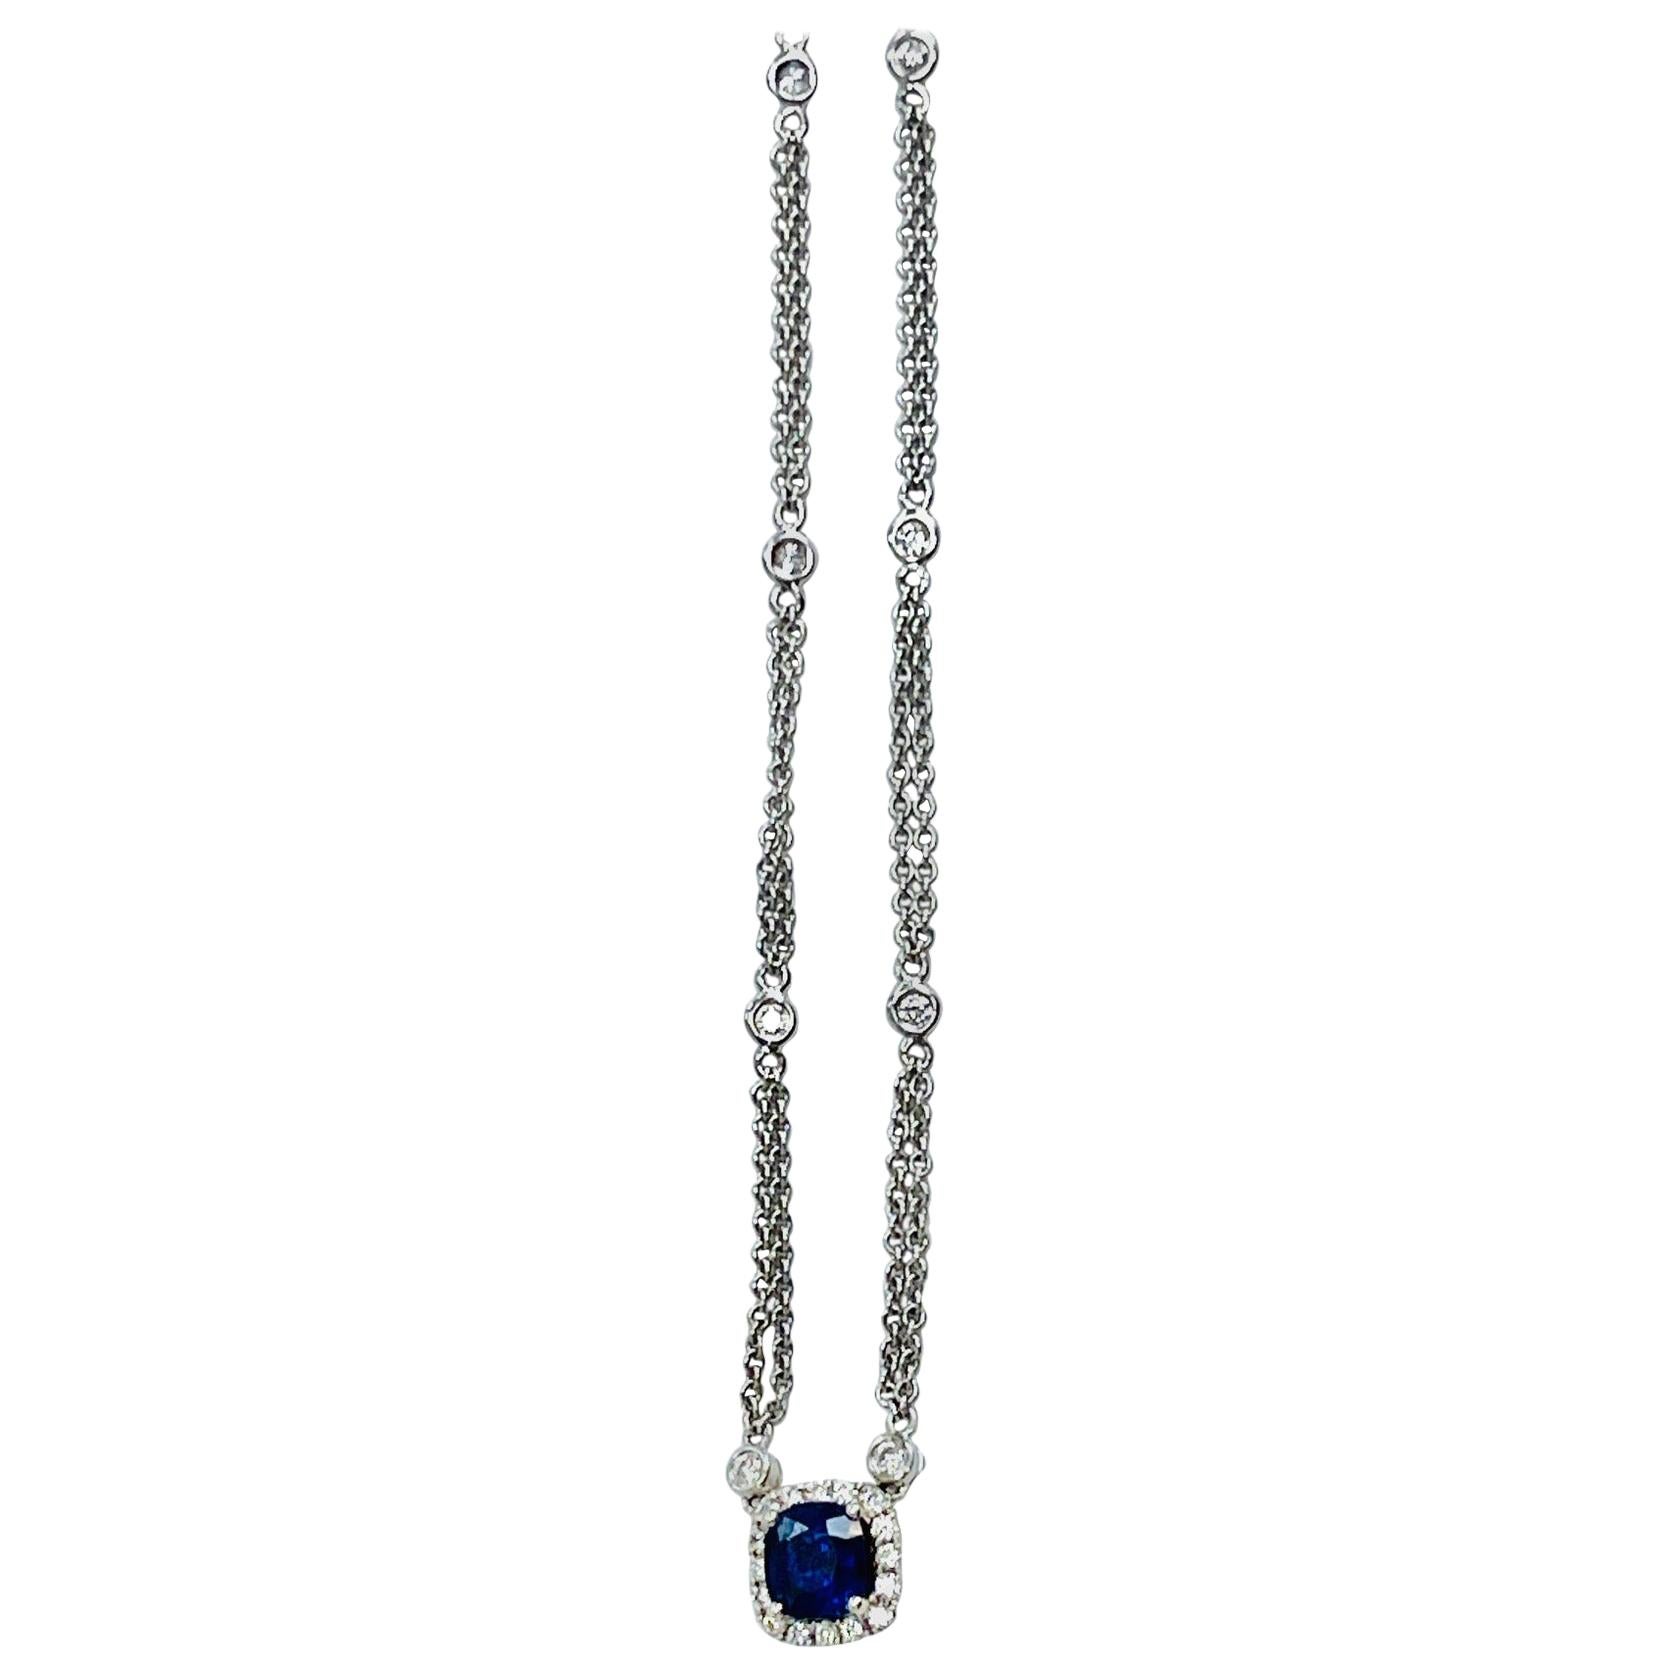 1.05 Carat Cushion Sapphire set in 18k white gold pendant/ necklace with 0.19 carat diamond.